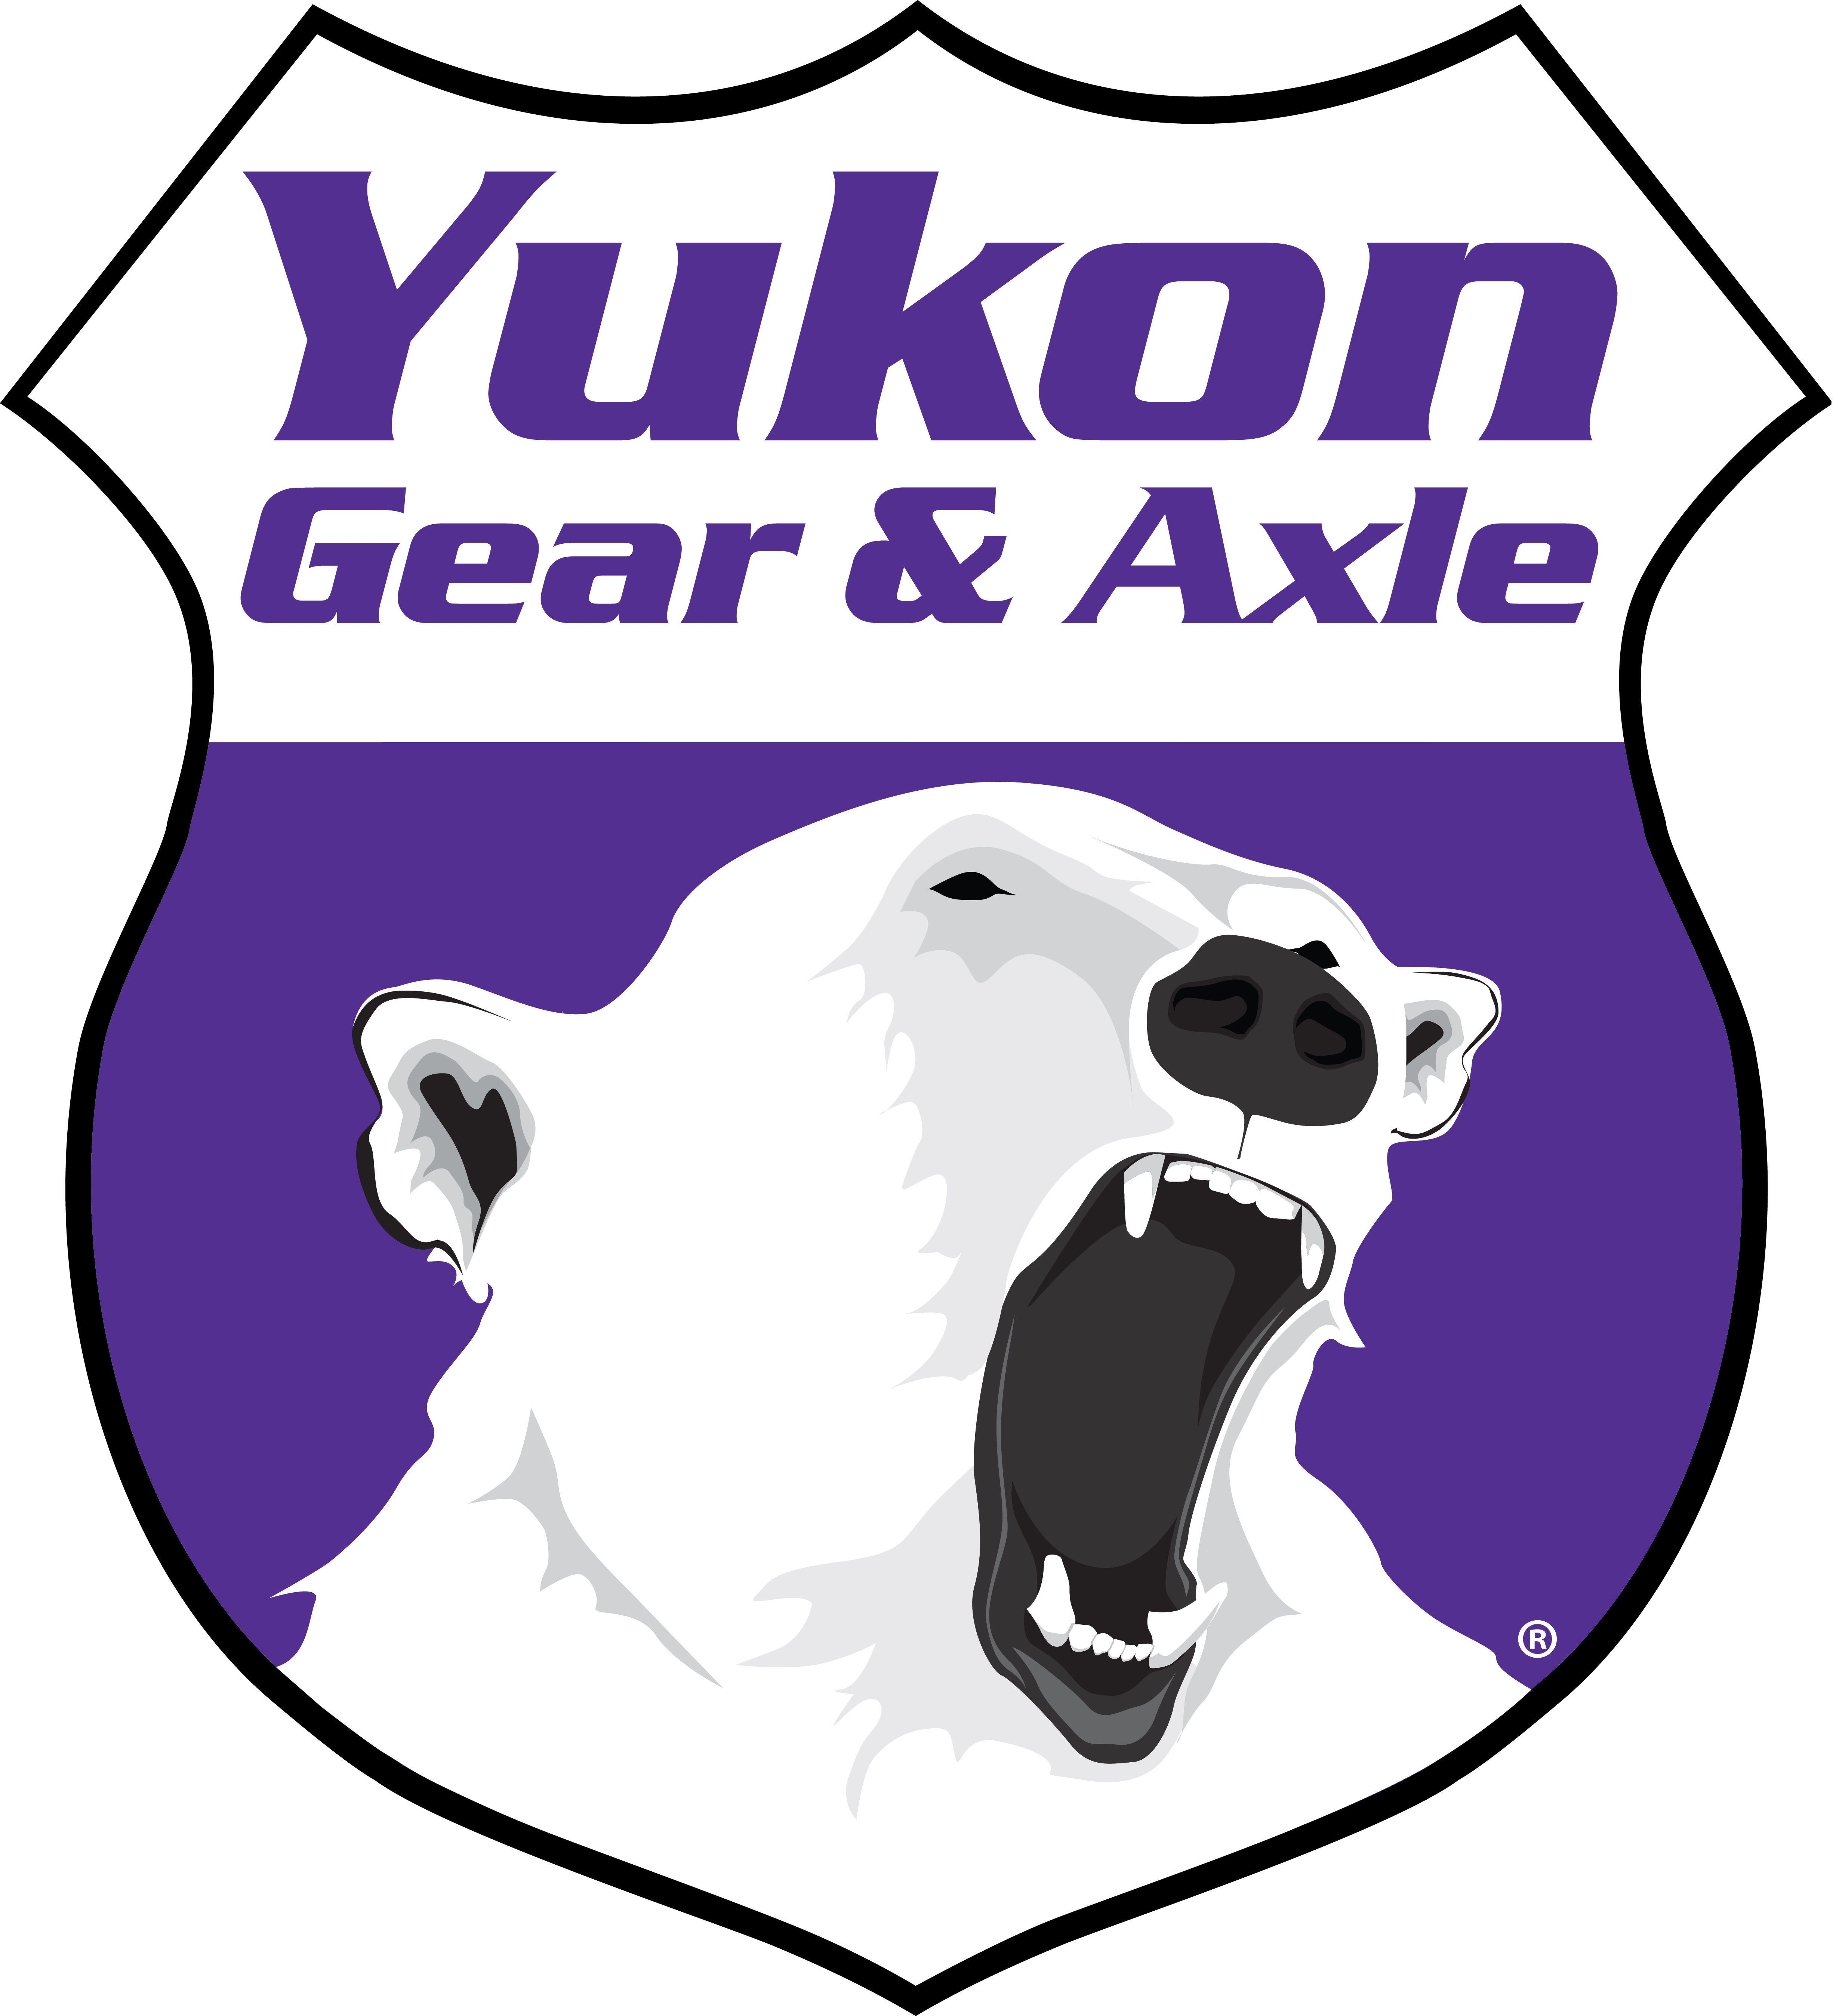 Yukon replacement yoke for Dana 60 and 70 with 1410 U/Joint size. 